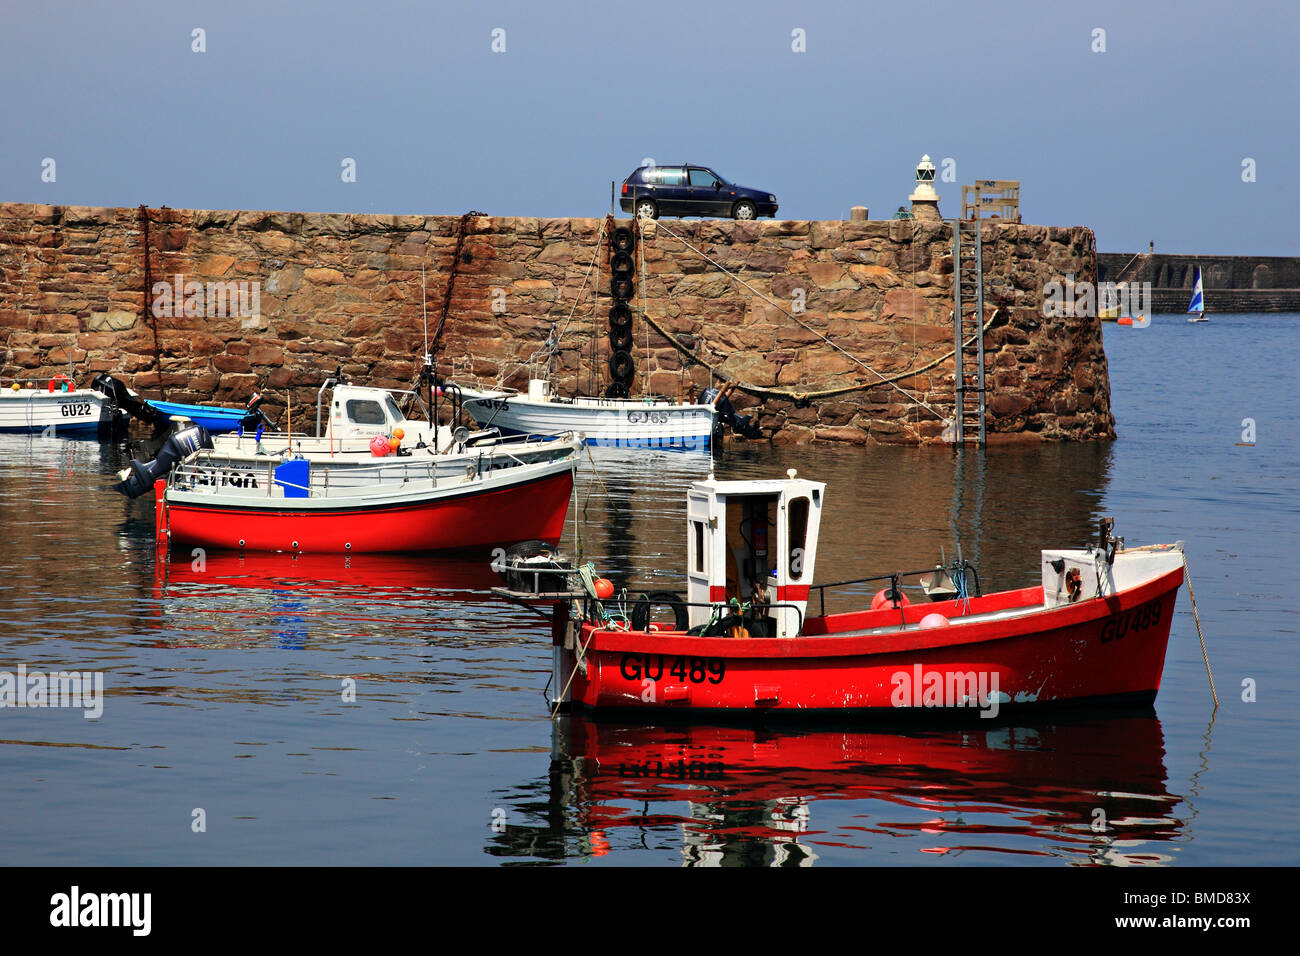 Boats in the Harbour, Alderney, Channel Island, United Kingdom Stock Photo